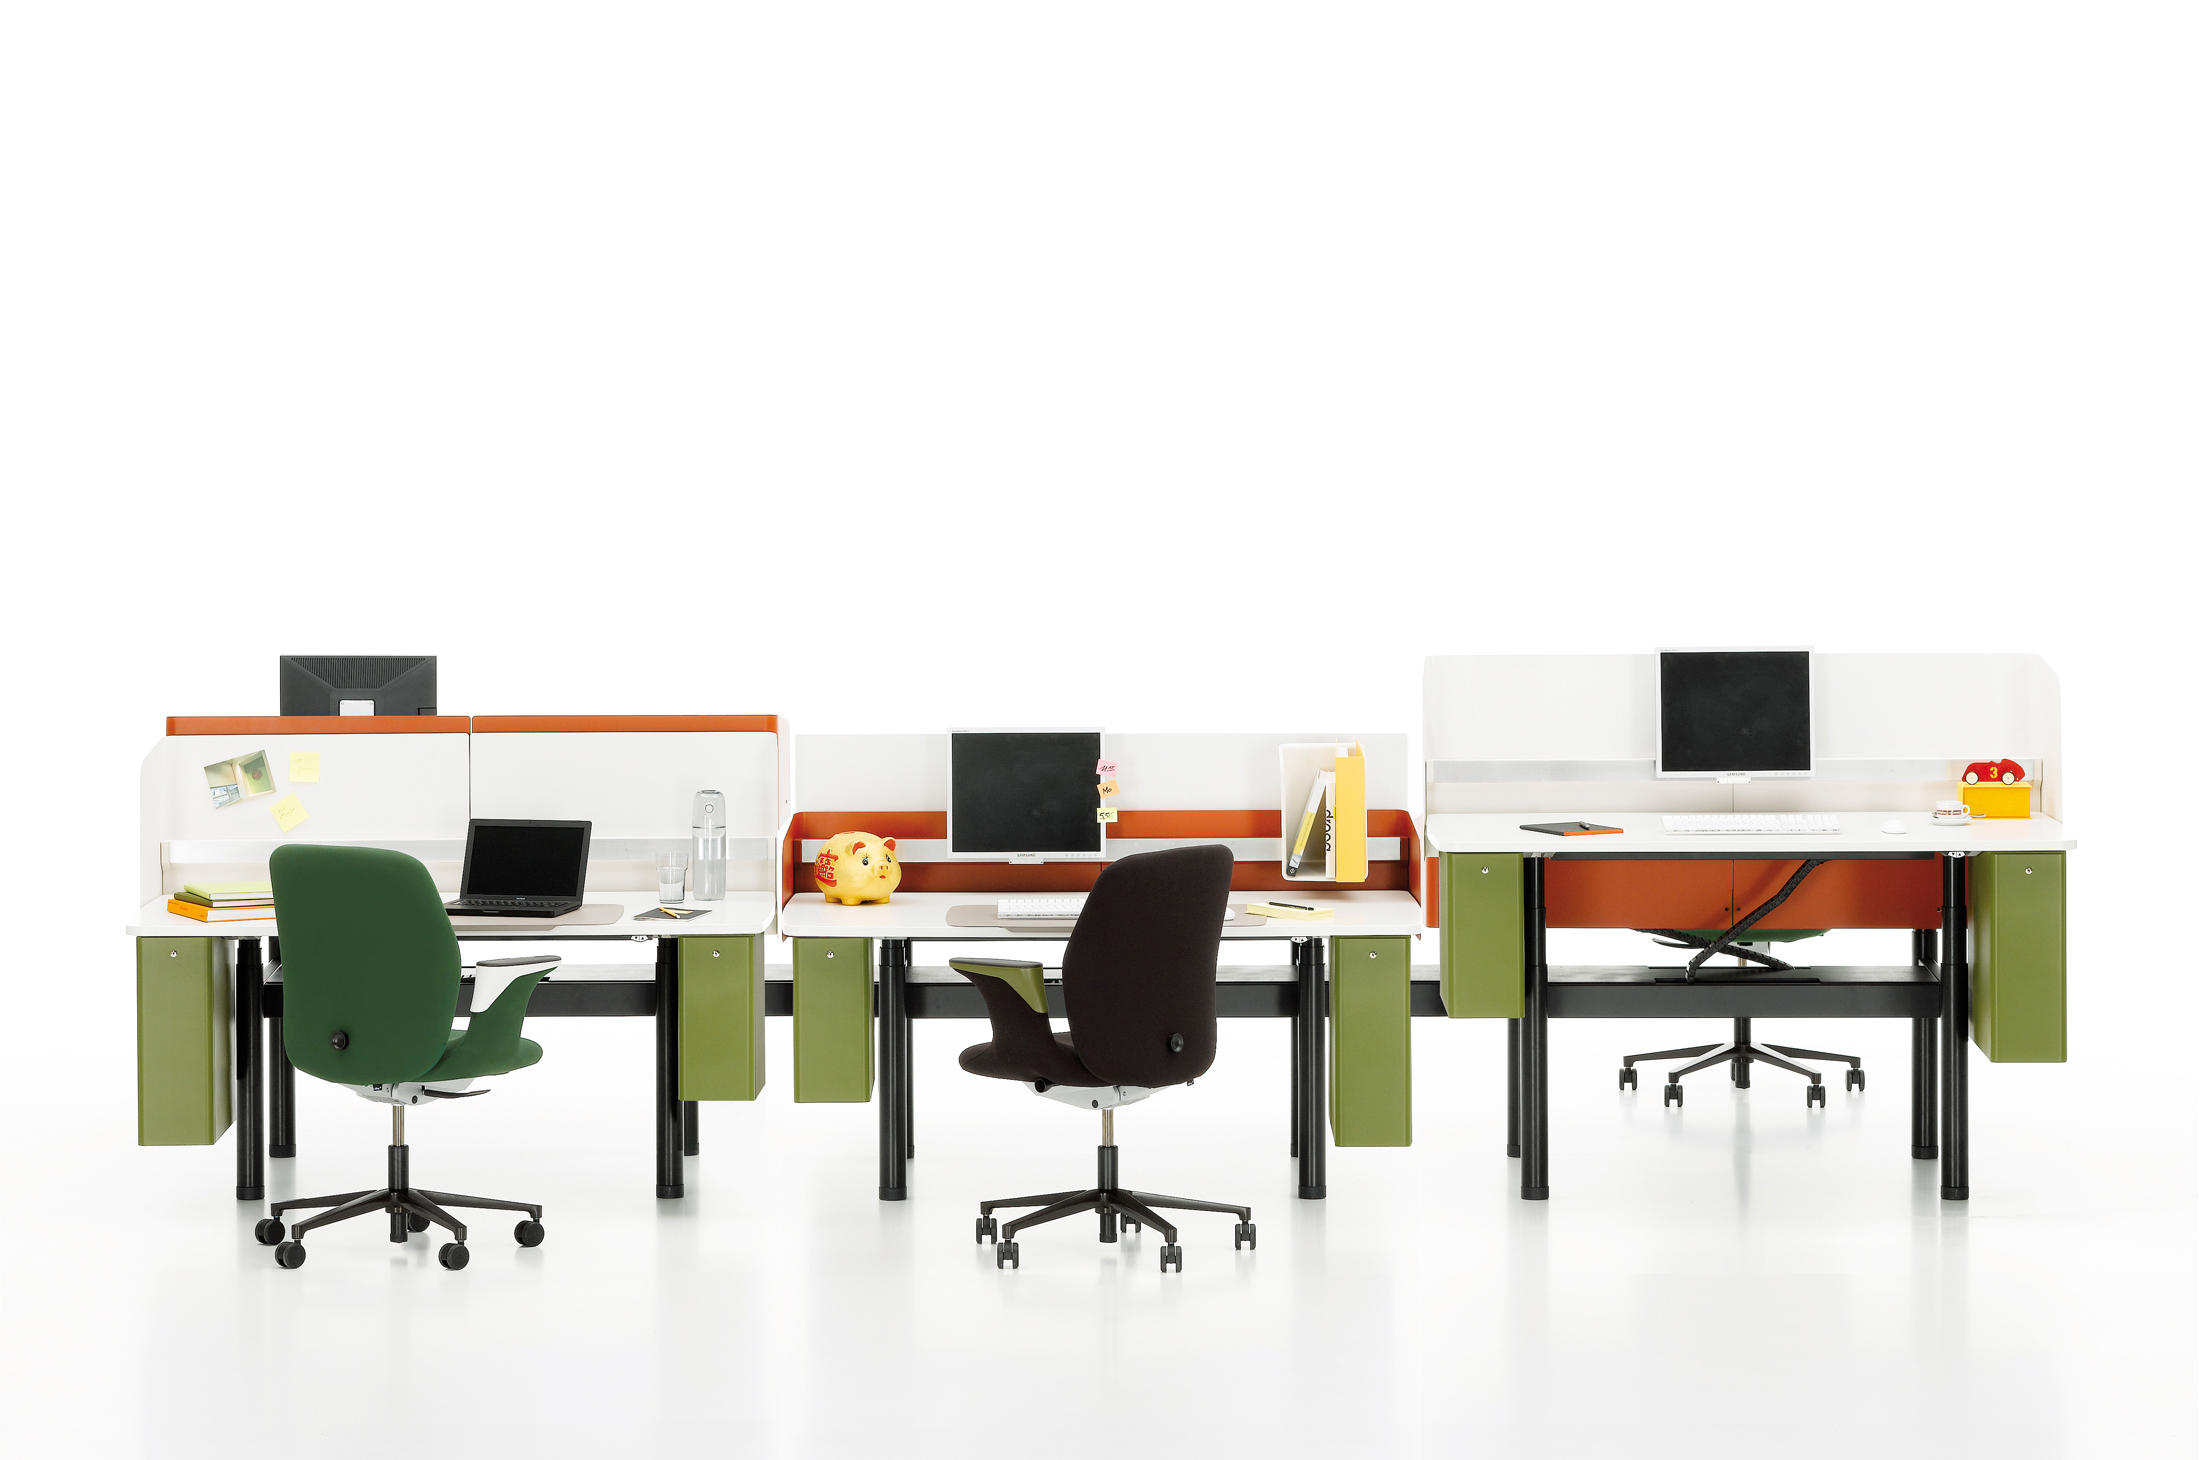 Гениальные проекты. Bouroullec brothers Furniture. Карандаш укороченный Office Space. Vitra Suit. Table Milano we.